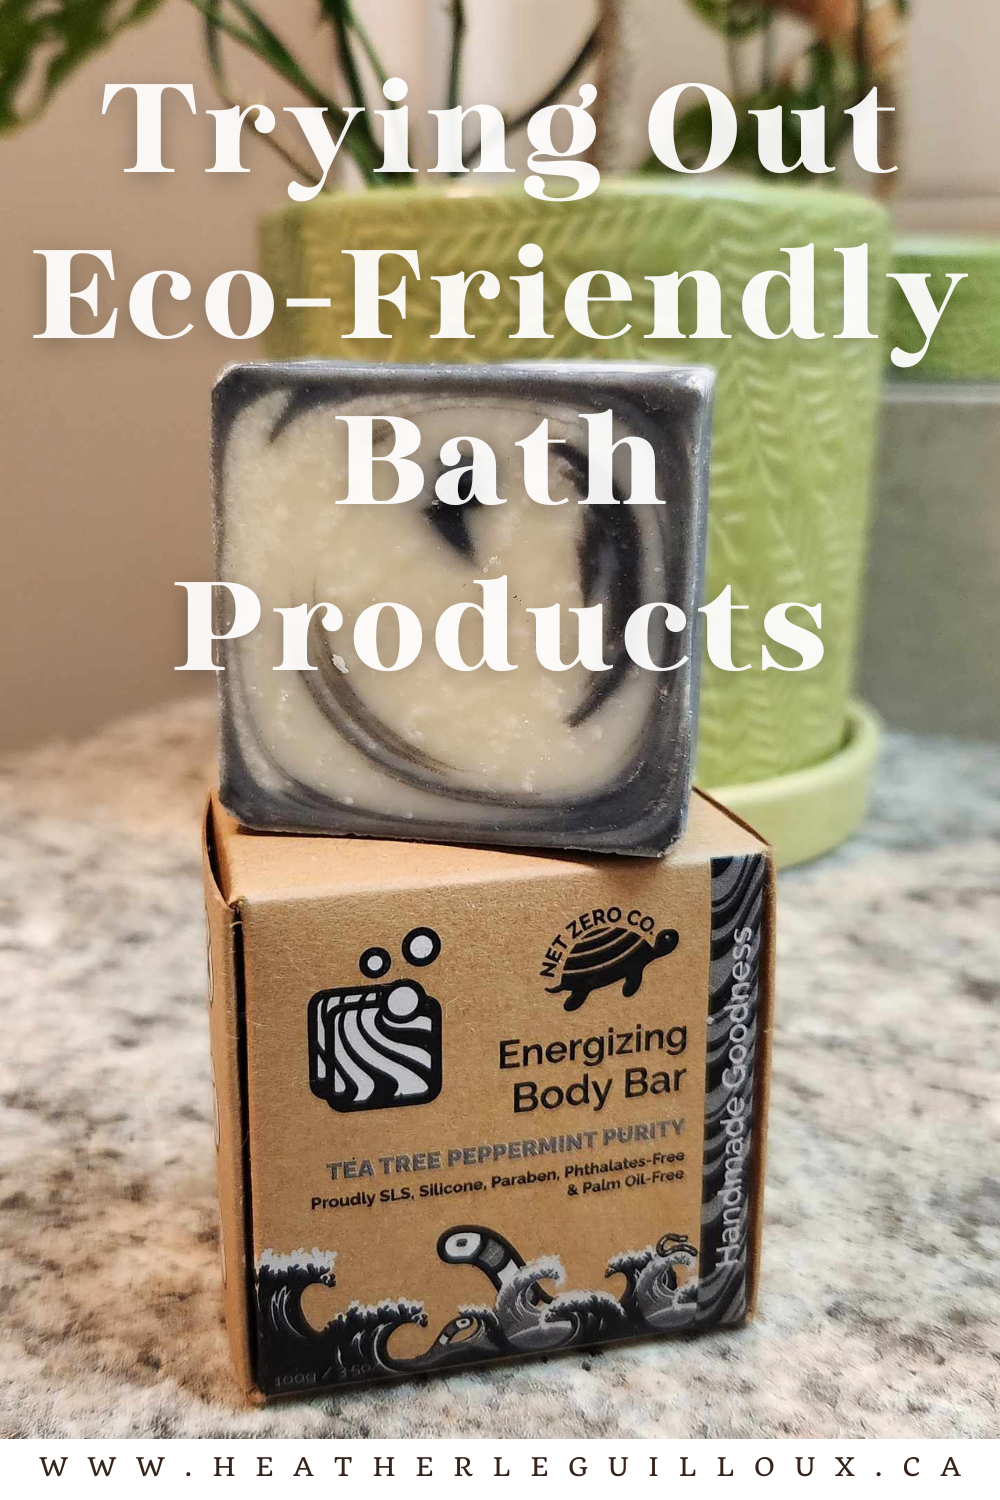 I had the chance to try out a few products of my choosing from Net Zero Company, who has dedicated their mission to replacing single-use plastic products with sustainable and reusable products. I am always looking for ways to reduce waste and help the planet, so right away I knew I would like to try their products. Keep reading to hear about my findings, and discover if these products would work for you, as well. #ecofriendly #netzero #naturalbathproducts #reduceplastic